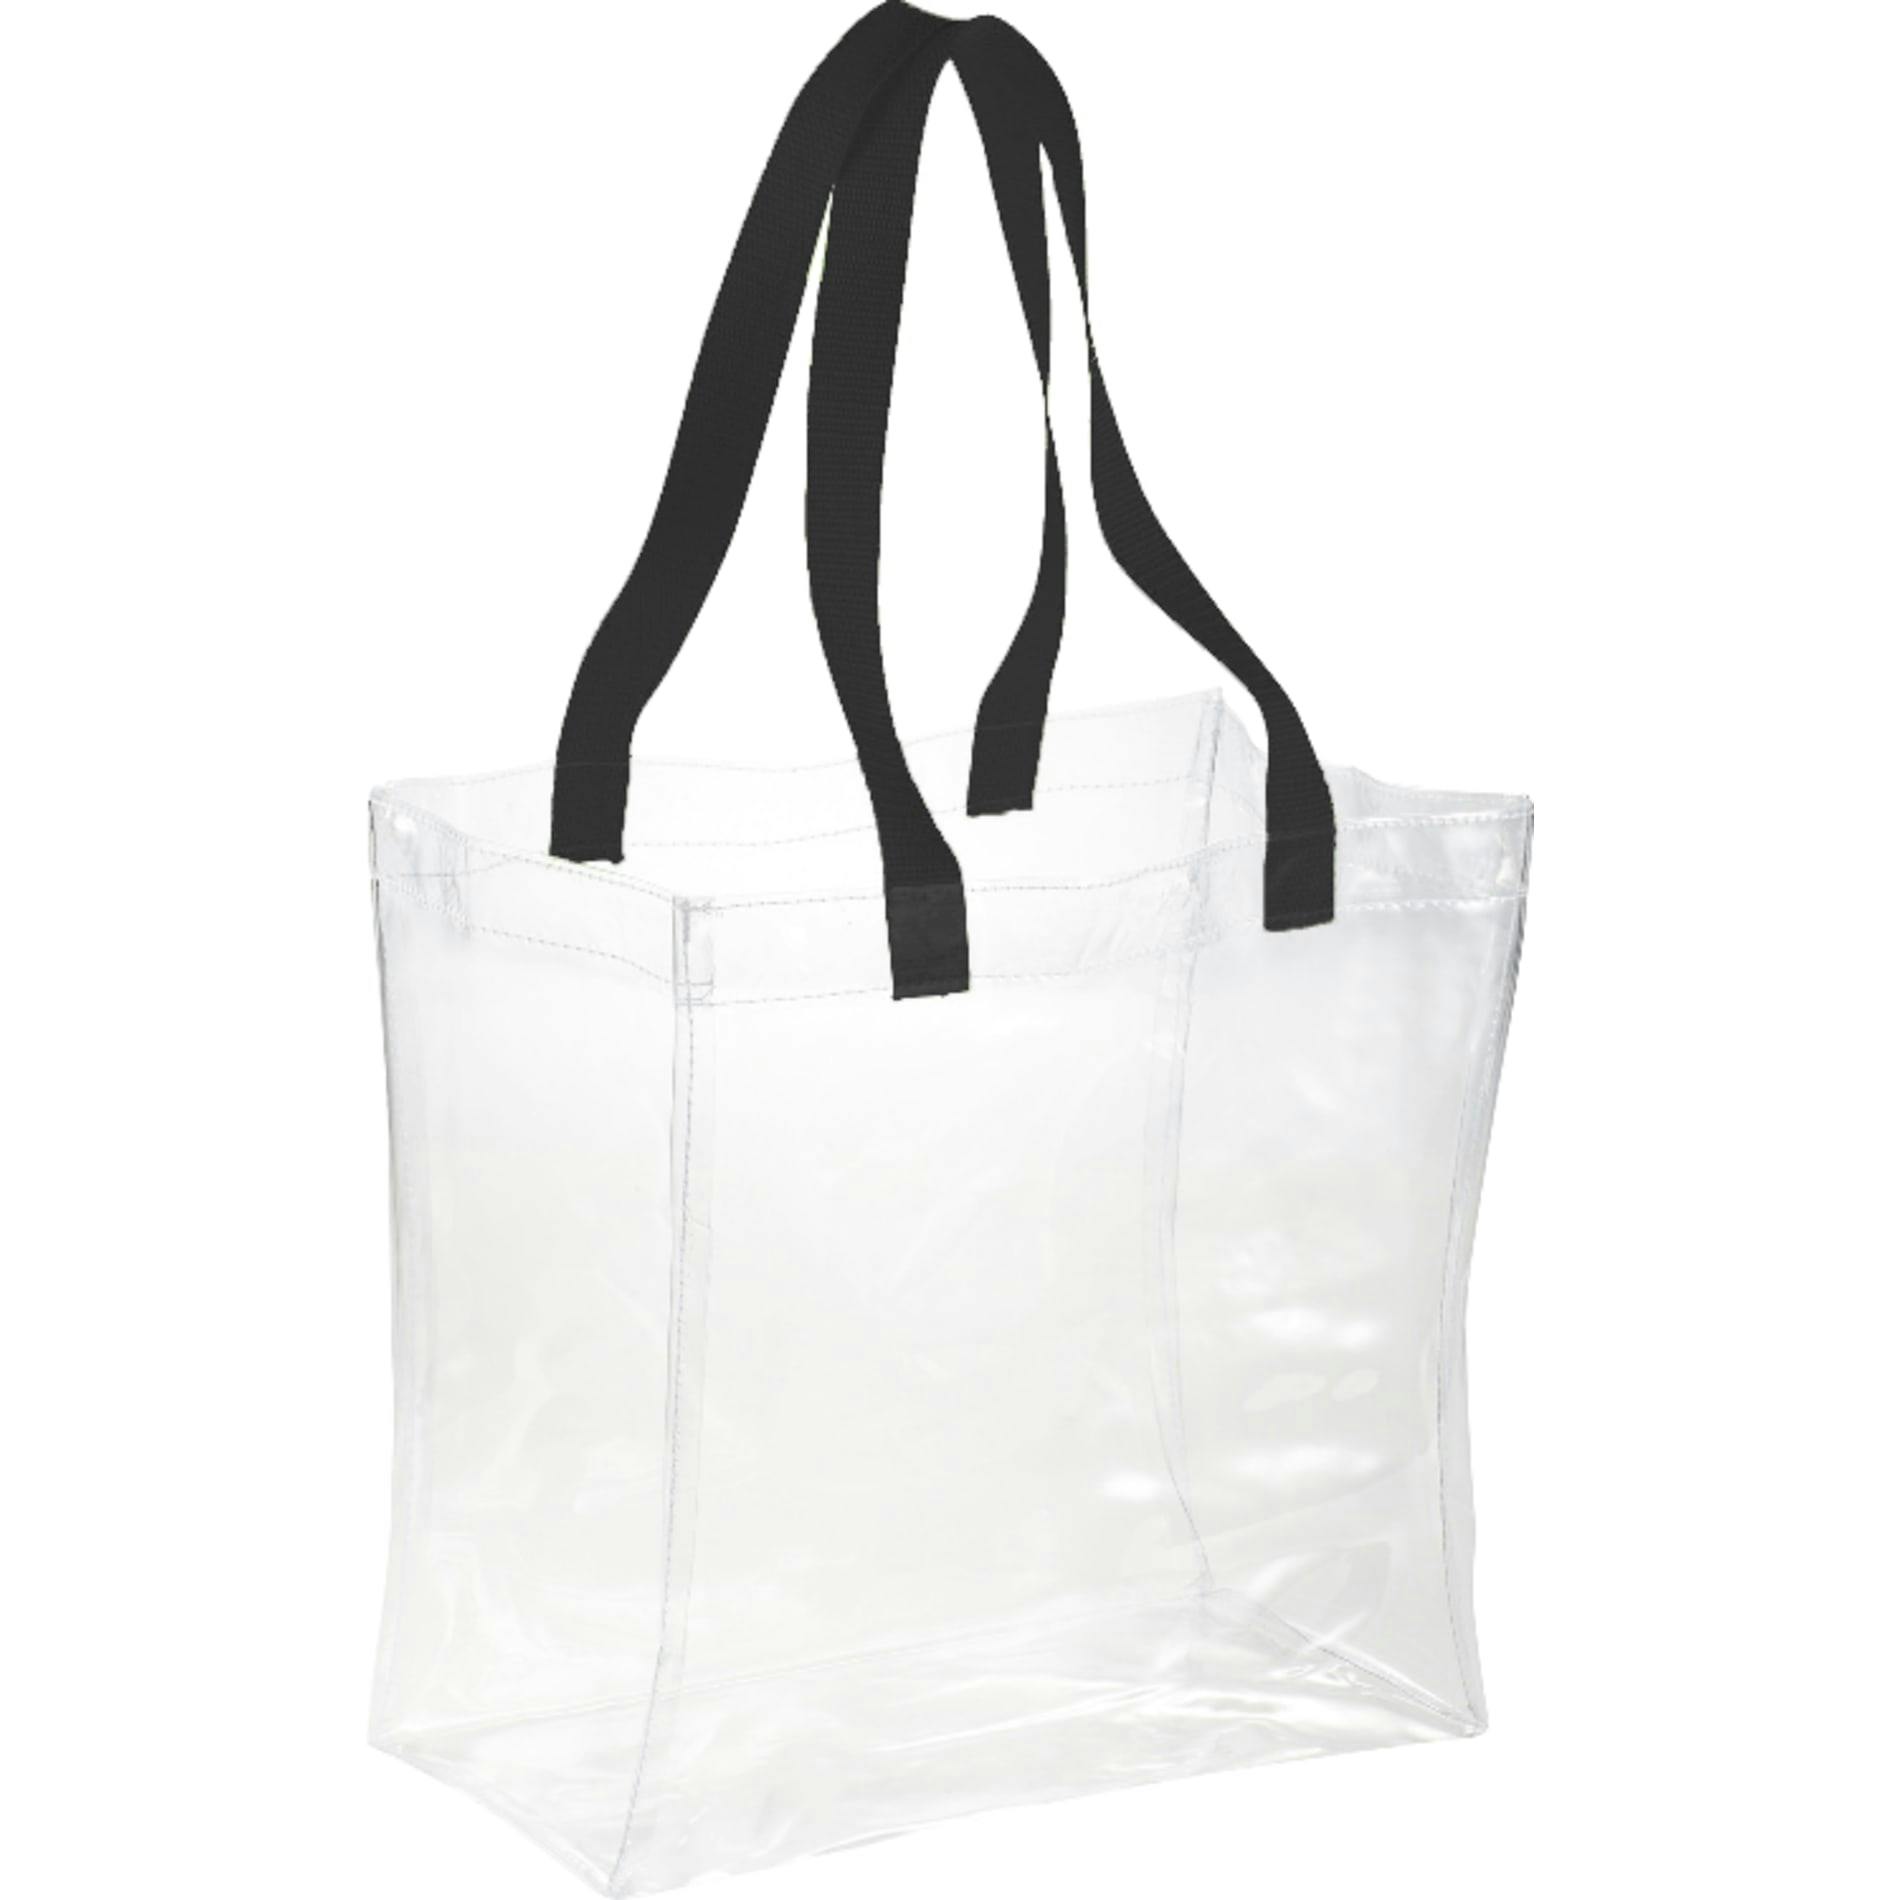 Rally Clear Stadium Tote - additional Image 2